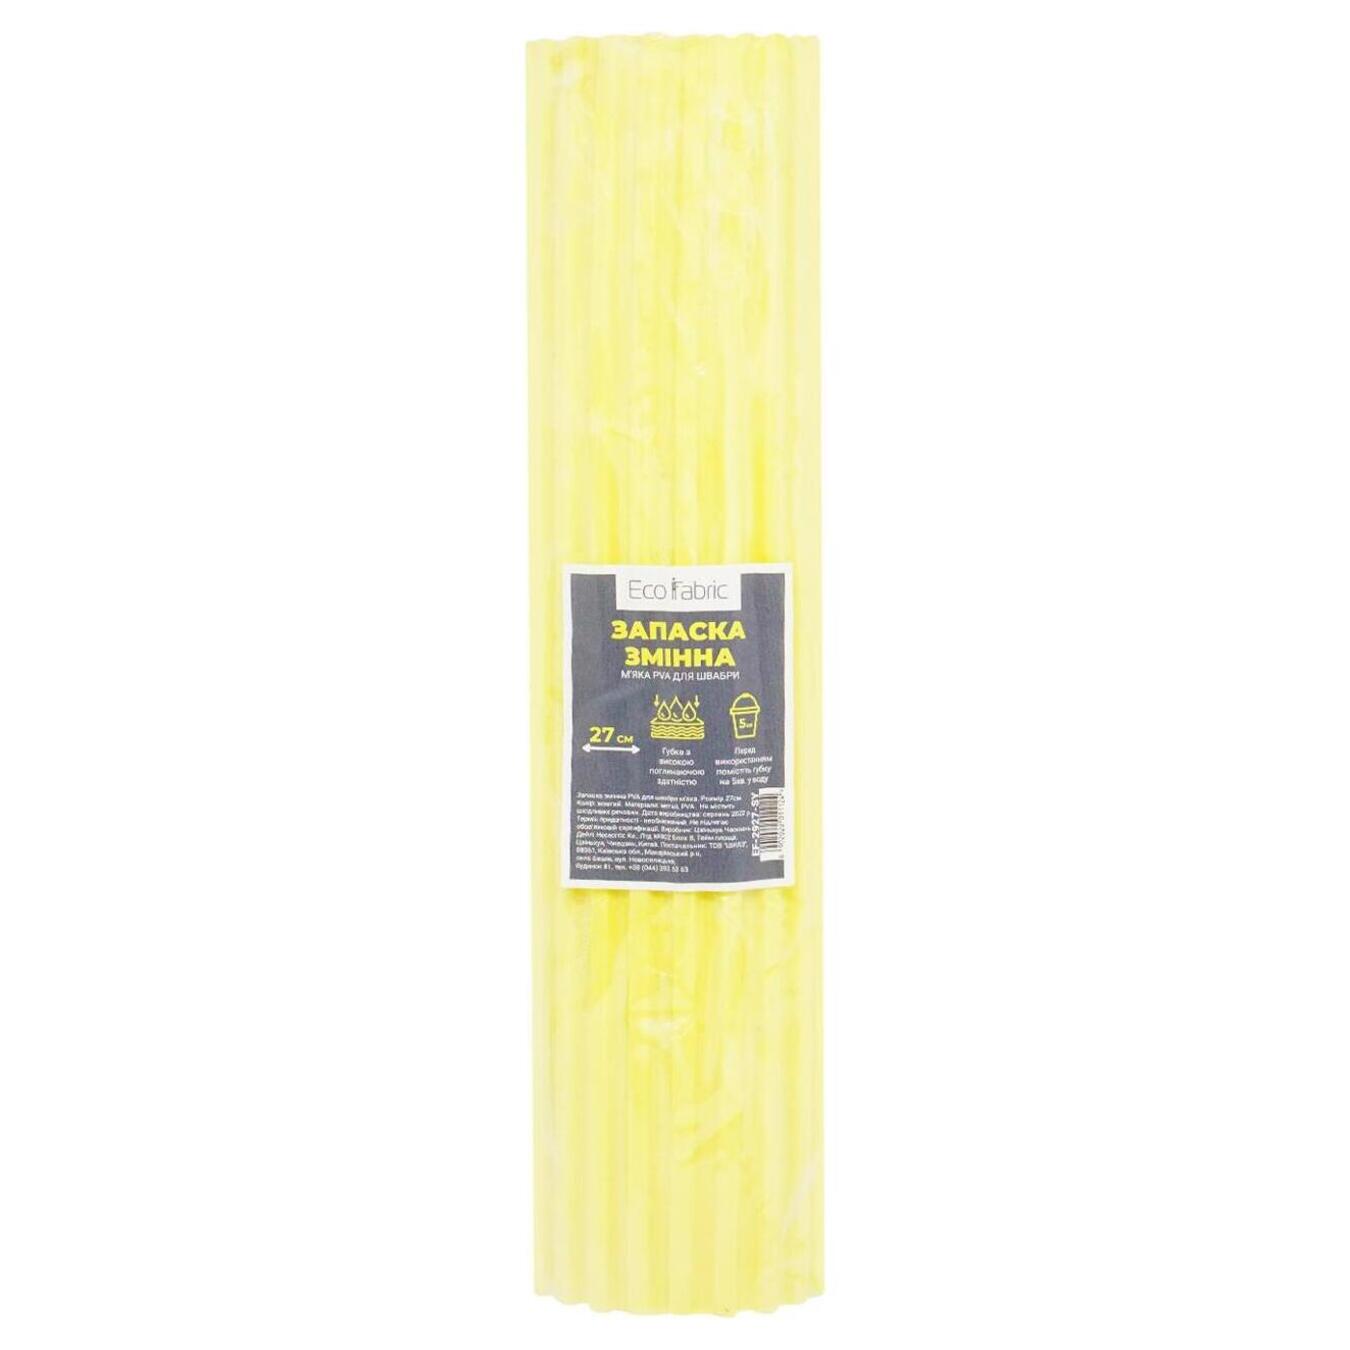 Refill for mop Eco Fabric yellow 27 cm